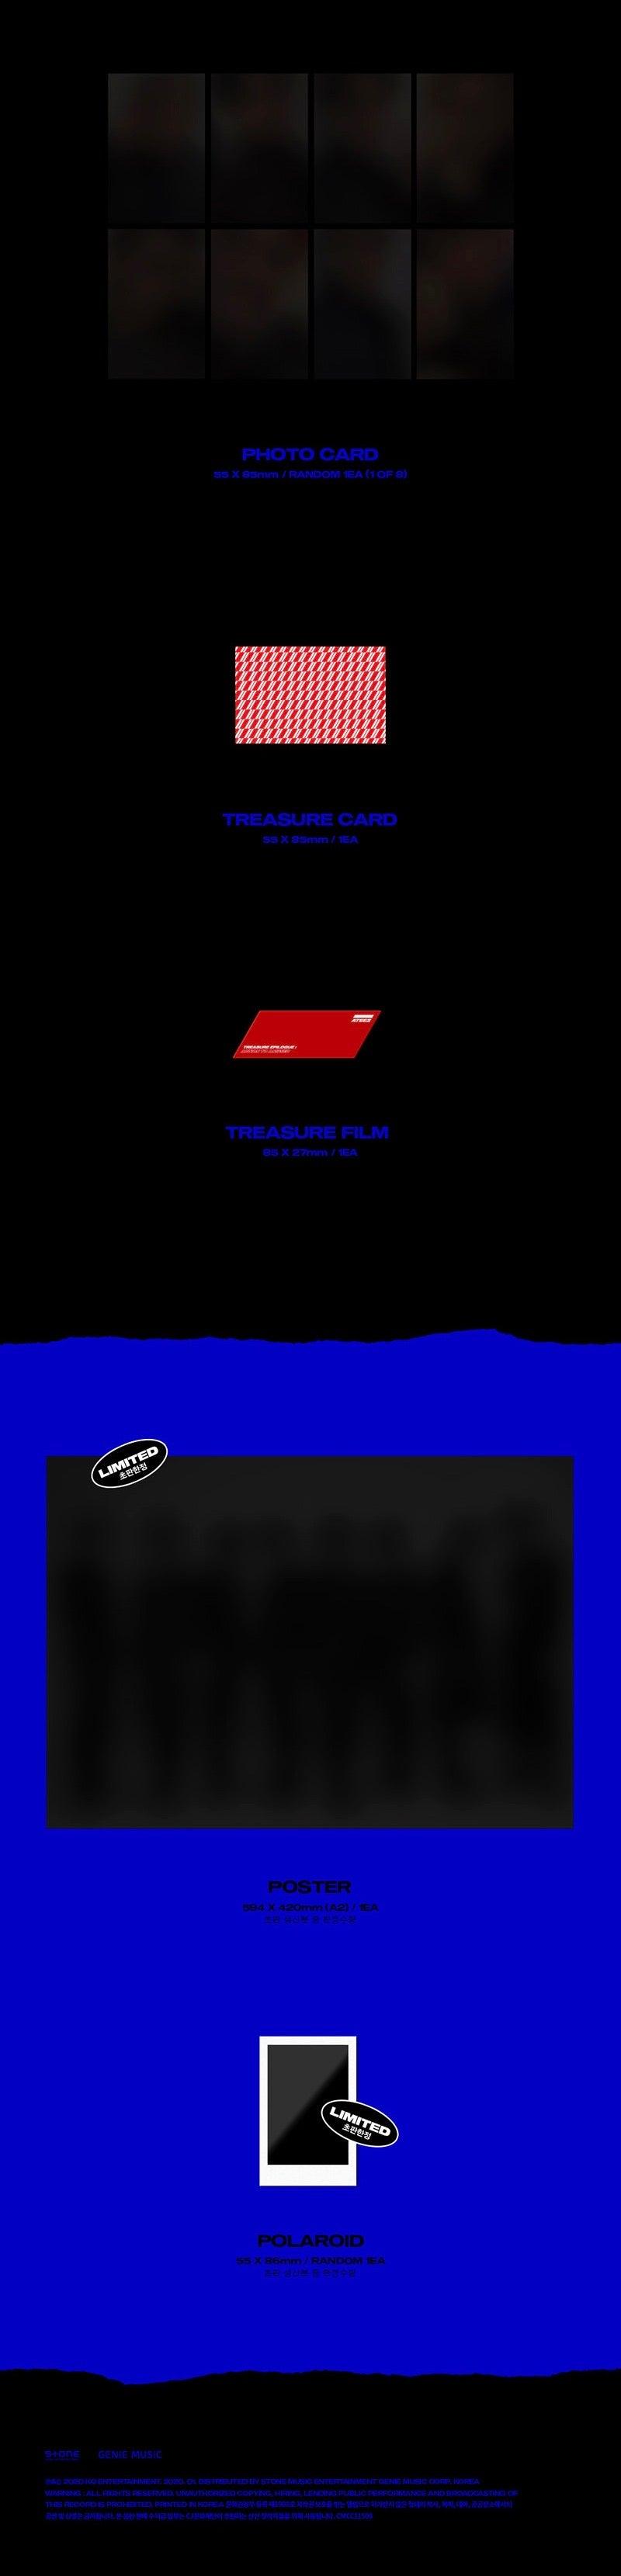 ATEEZ - Treasure Epilouge: Action to Answer - J-Store Online